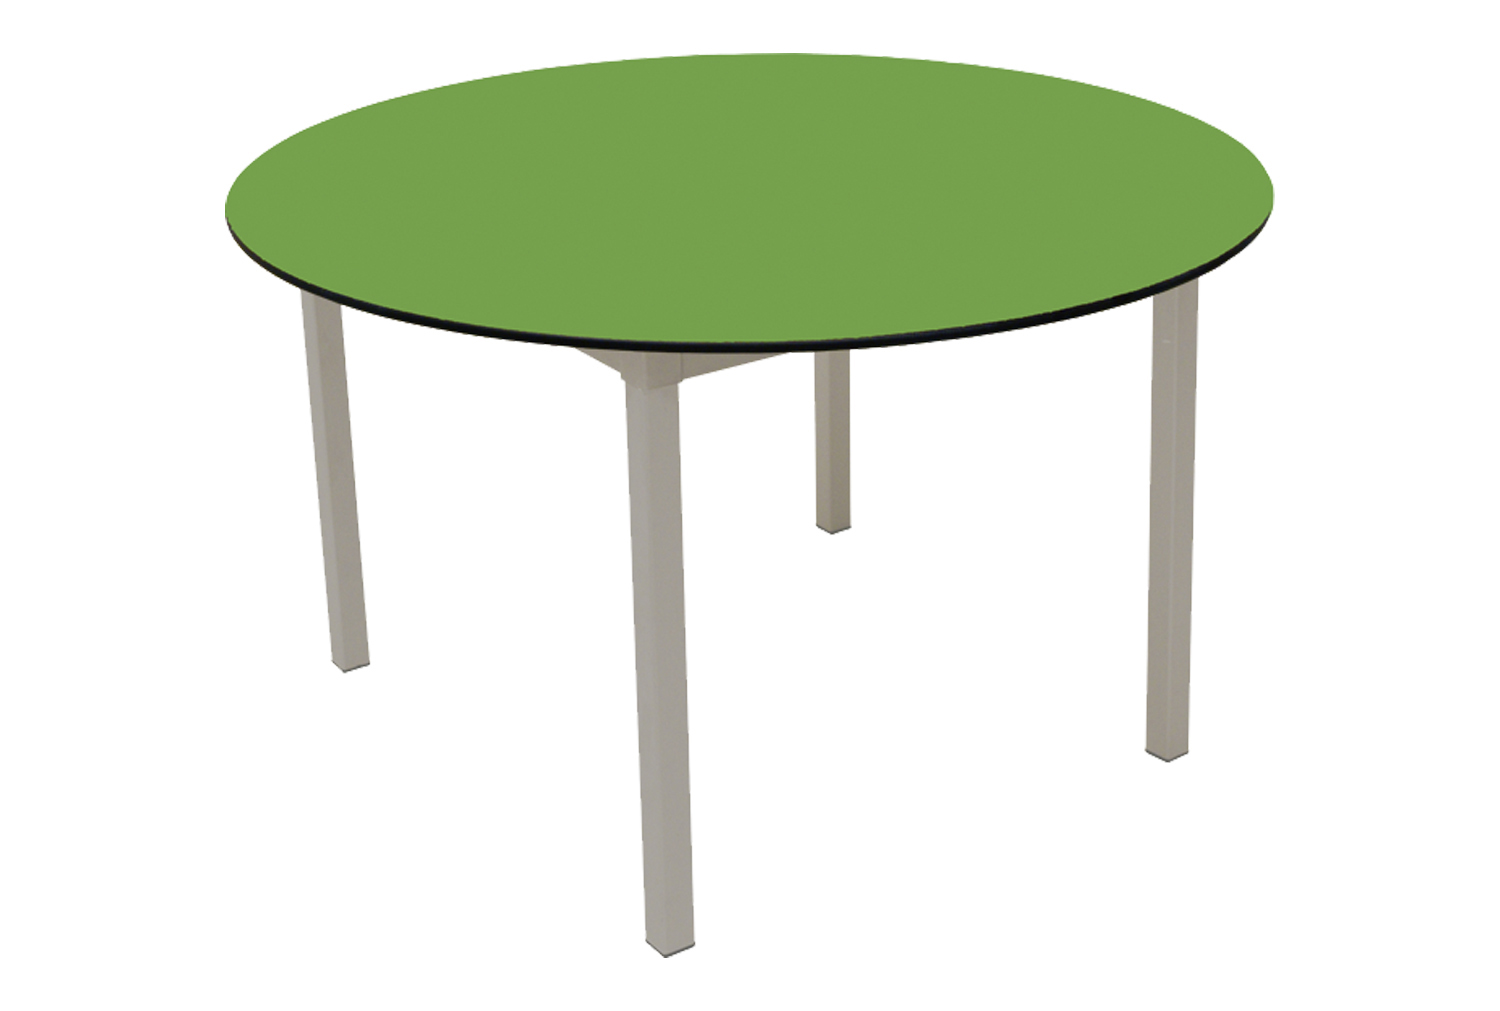 Gopak Enviro Compact Outdoor Round Classroom Table With Solid Top, 120dia (cm), Pea Green